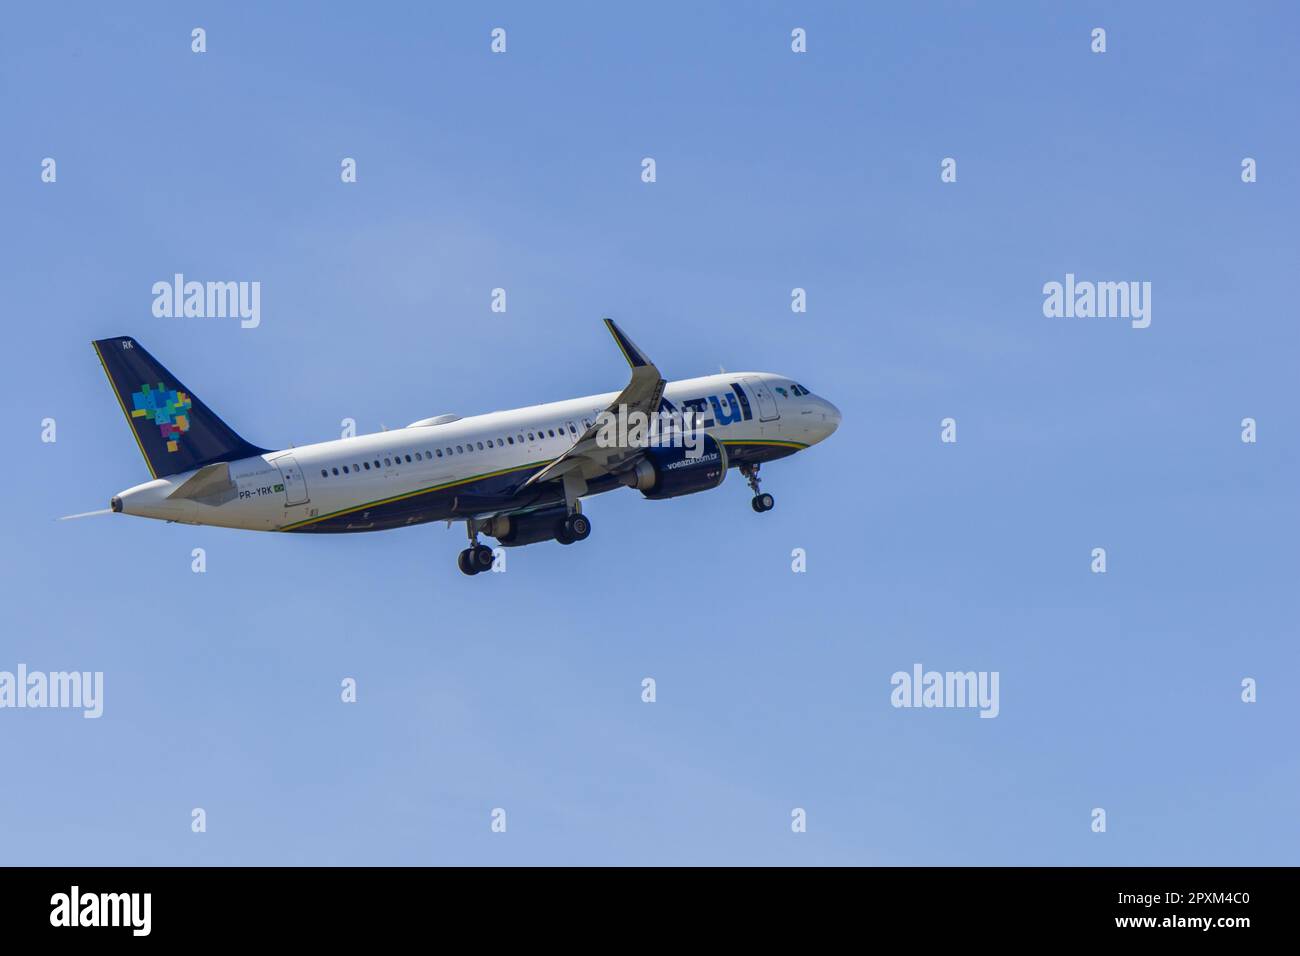 Airbus A320 Neo - PR-YRK - from Azul Brazilian Airlines flying, at the start of take-off, from Santarem Airport, with a clean blue sky Stock Photo